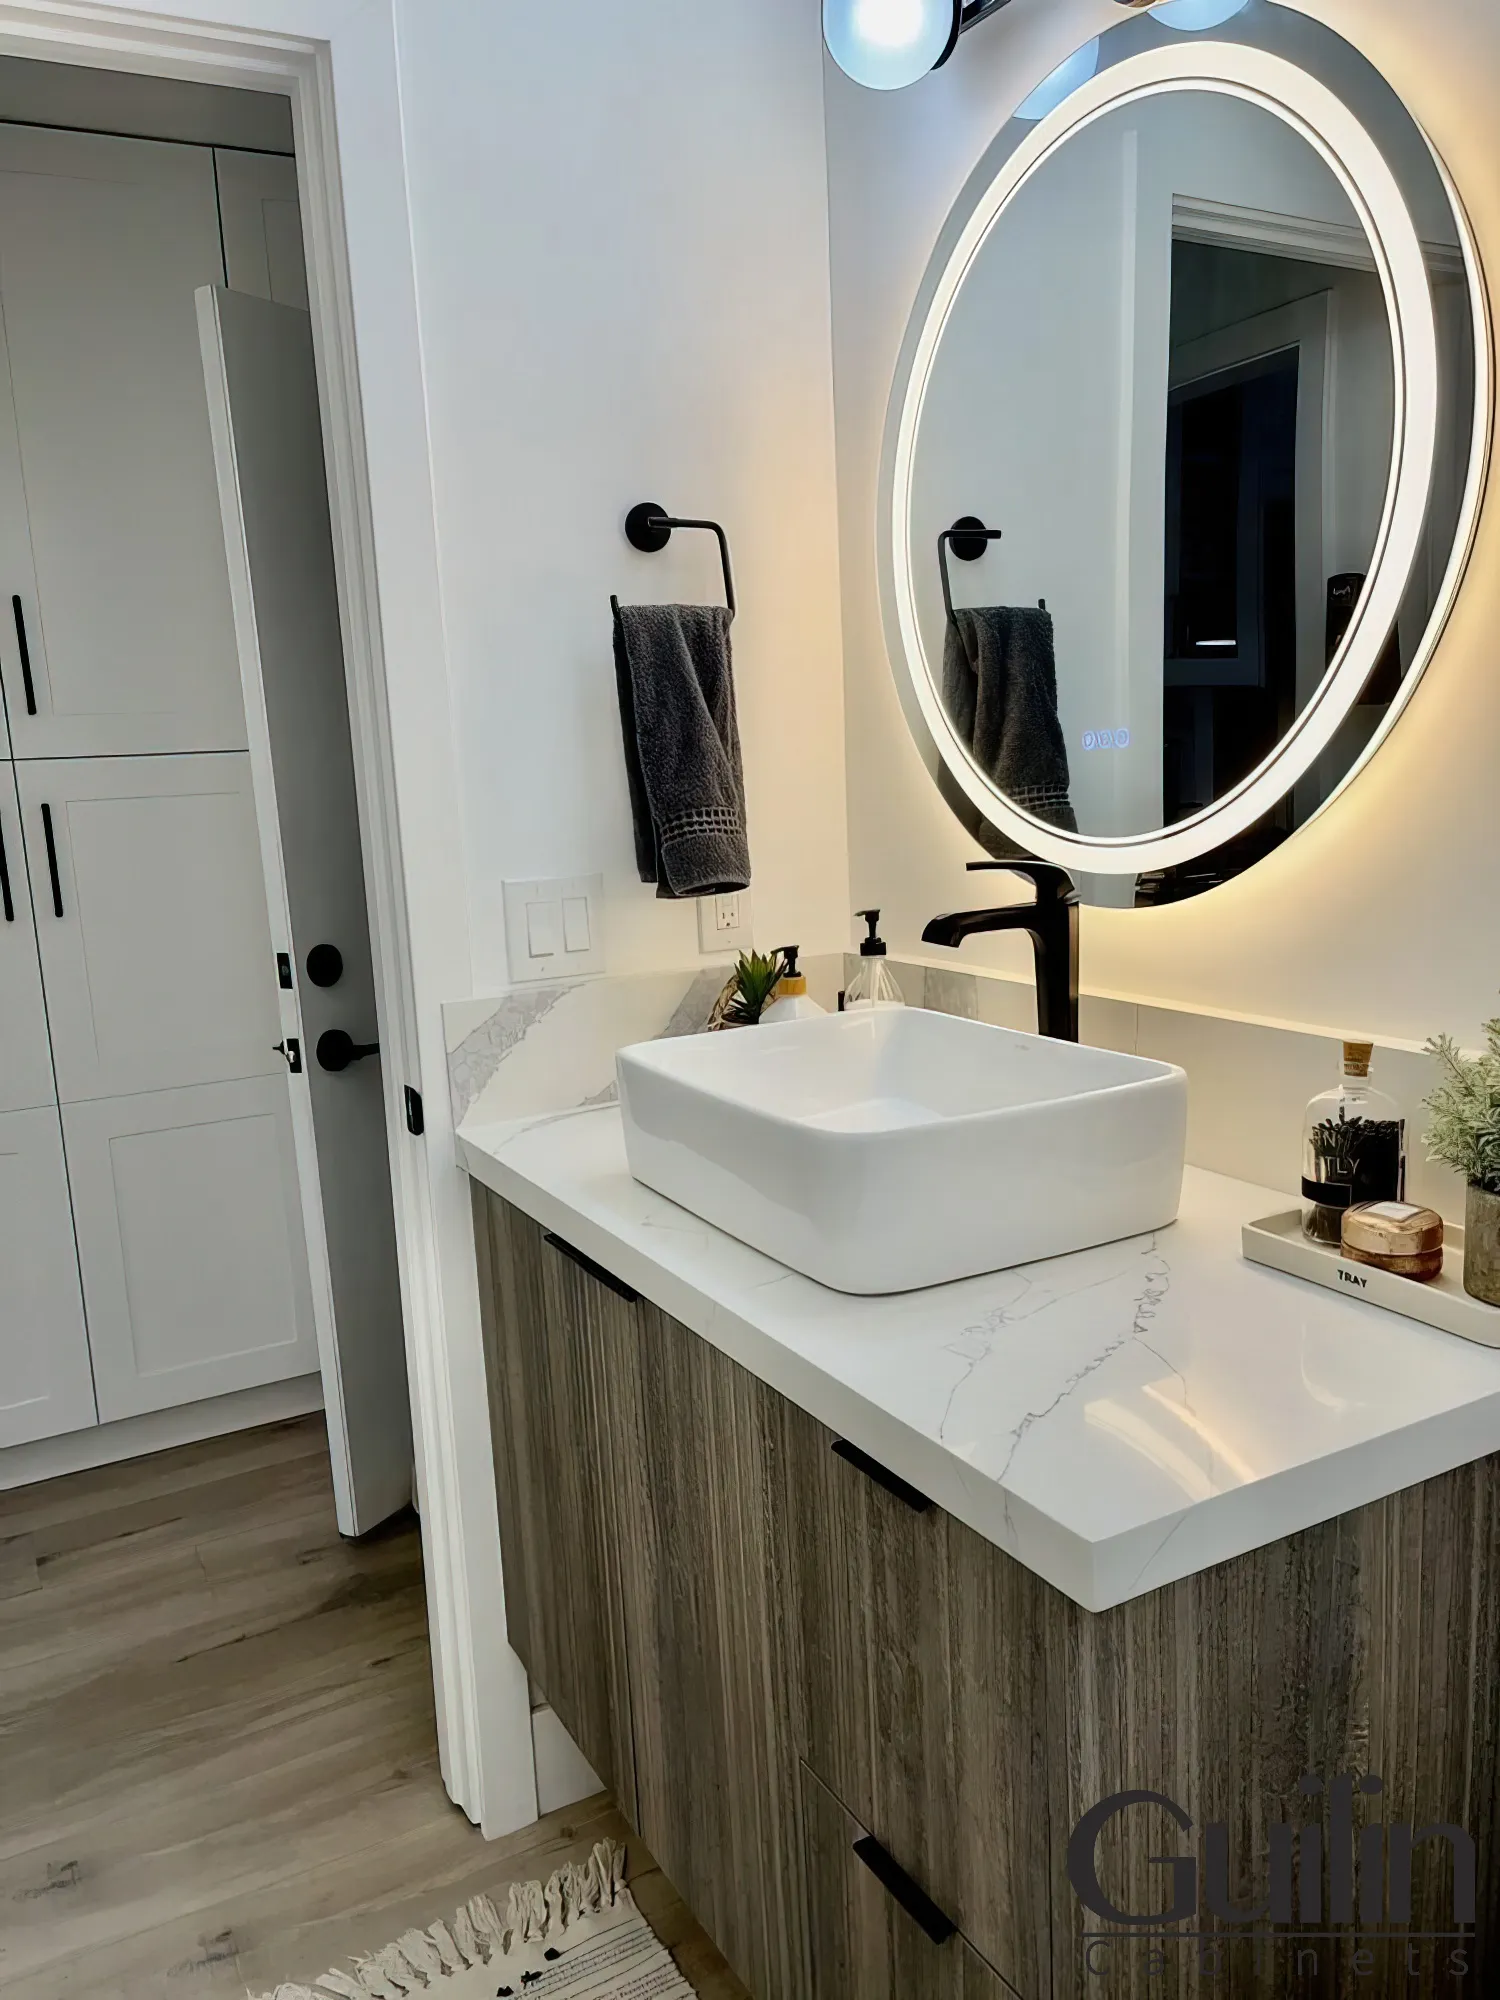 Smart mirrors can add convenience and comfort to your guest bathroom.